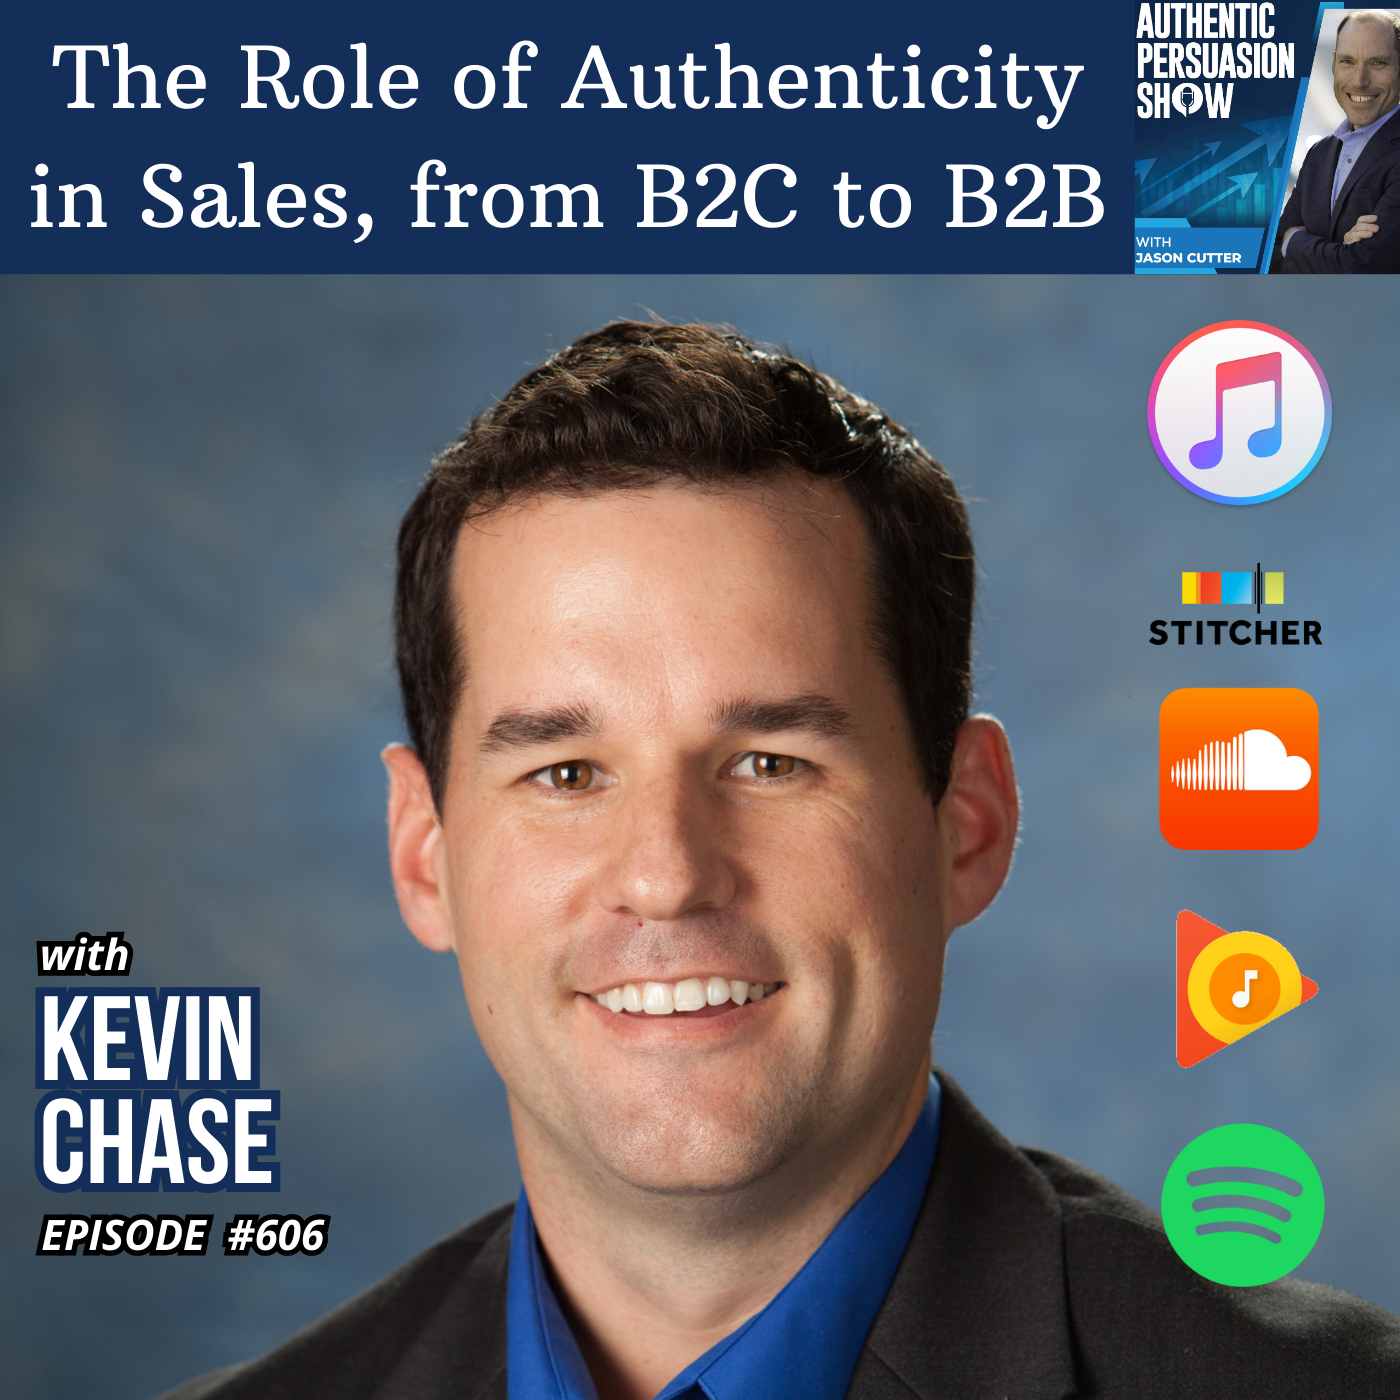 [606] The Role of Authenticity in Sales, from B2C to B2B, with Dr. Kevin Chase from Washington State University